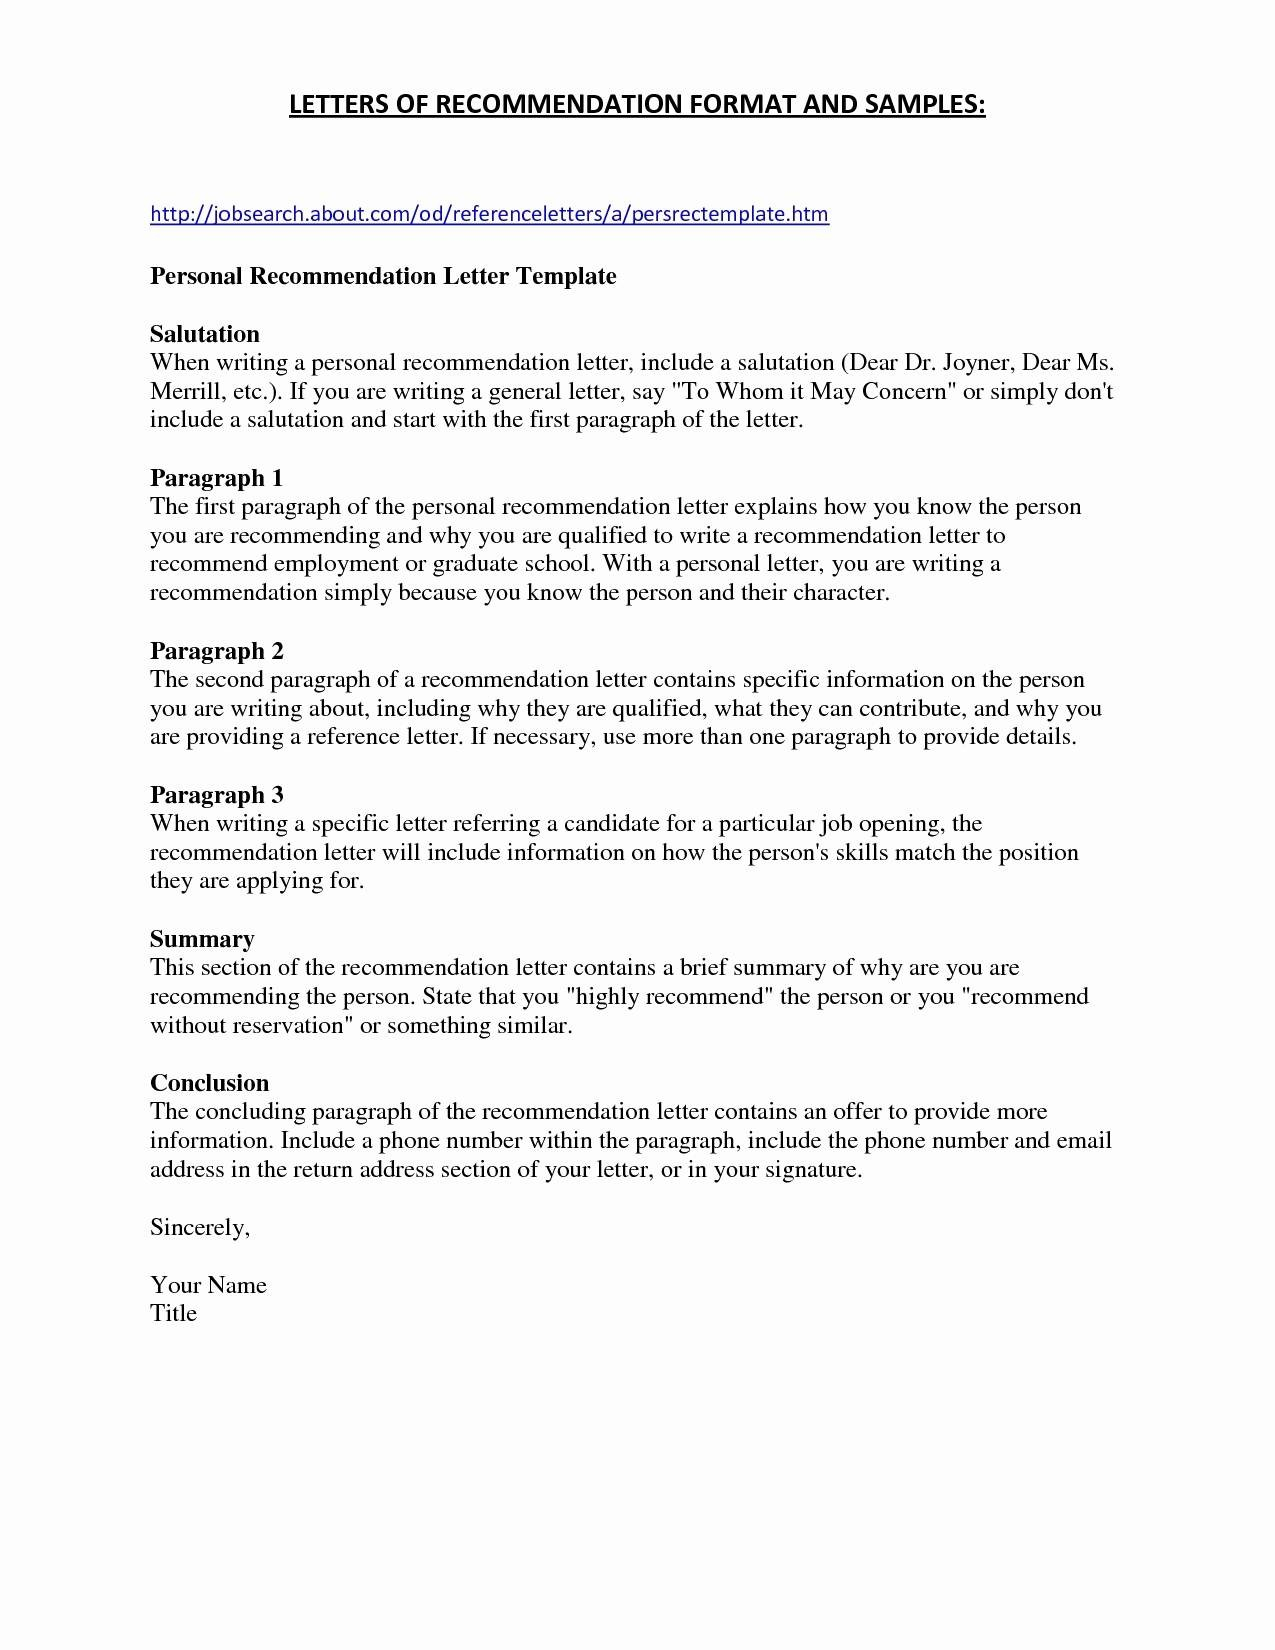 Rental Application Cover Letter Template - How to Write A Cover Letter for A Rental Application